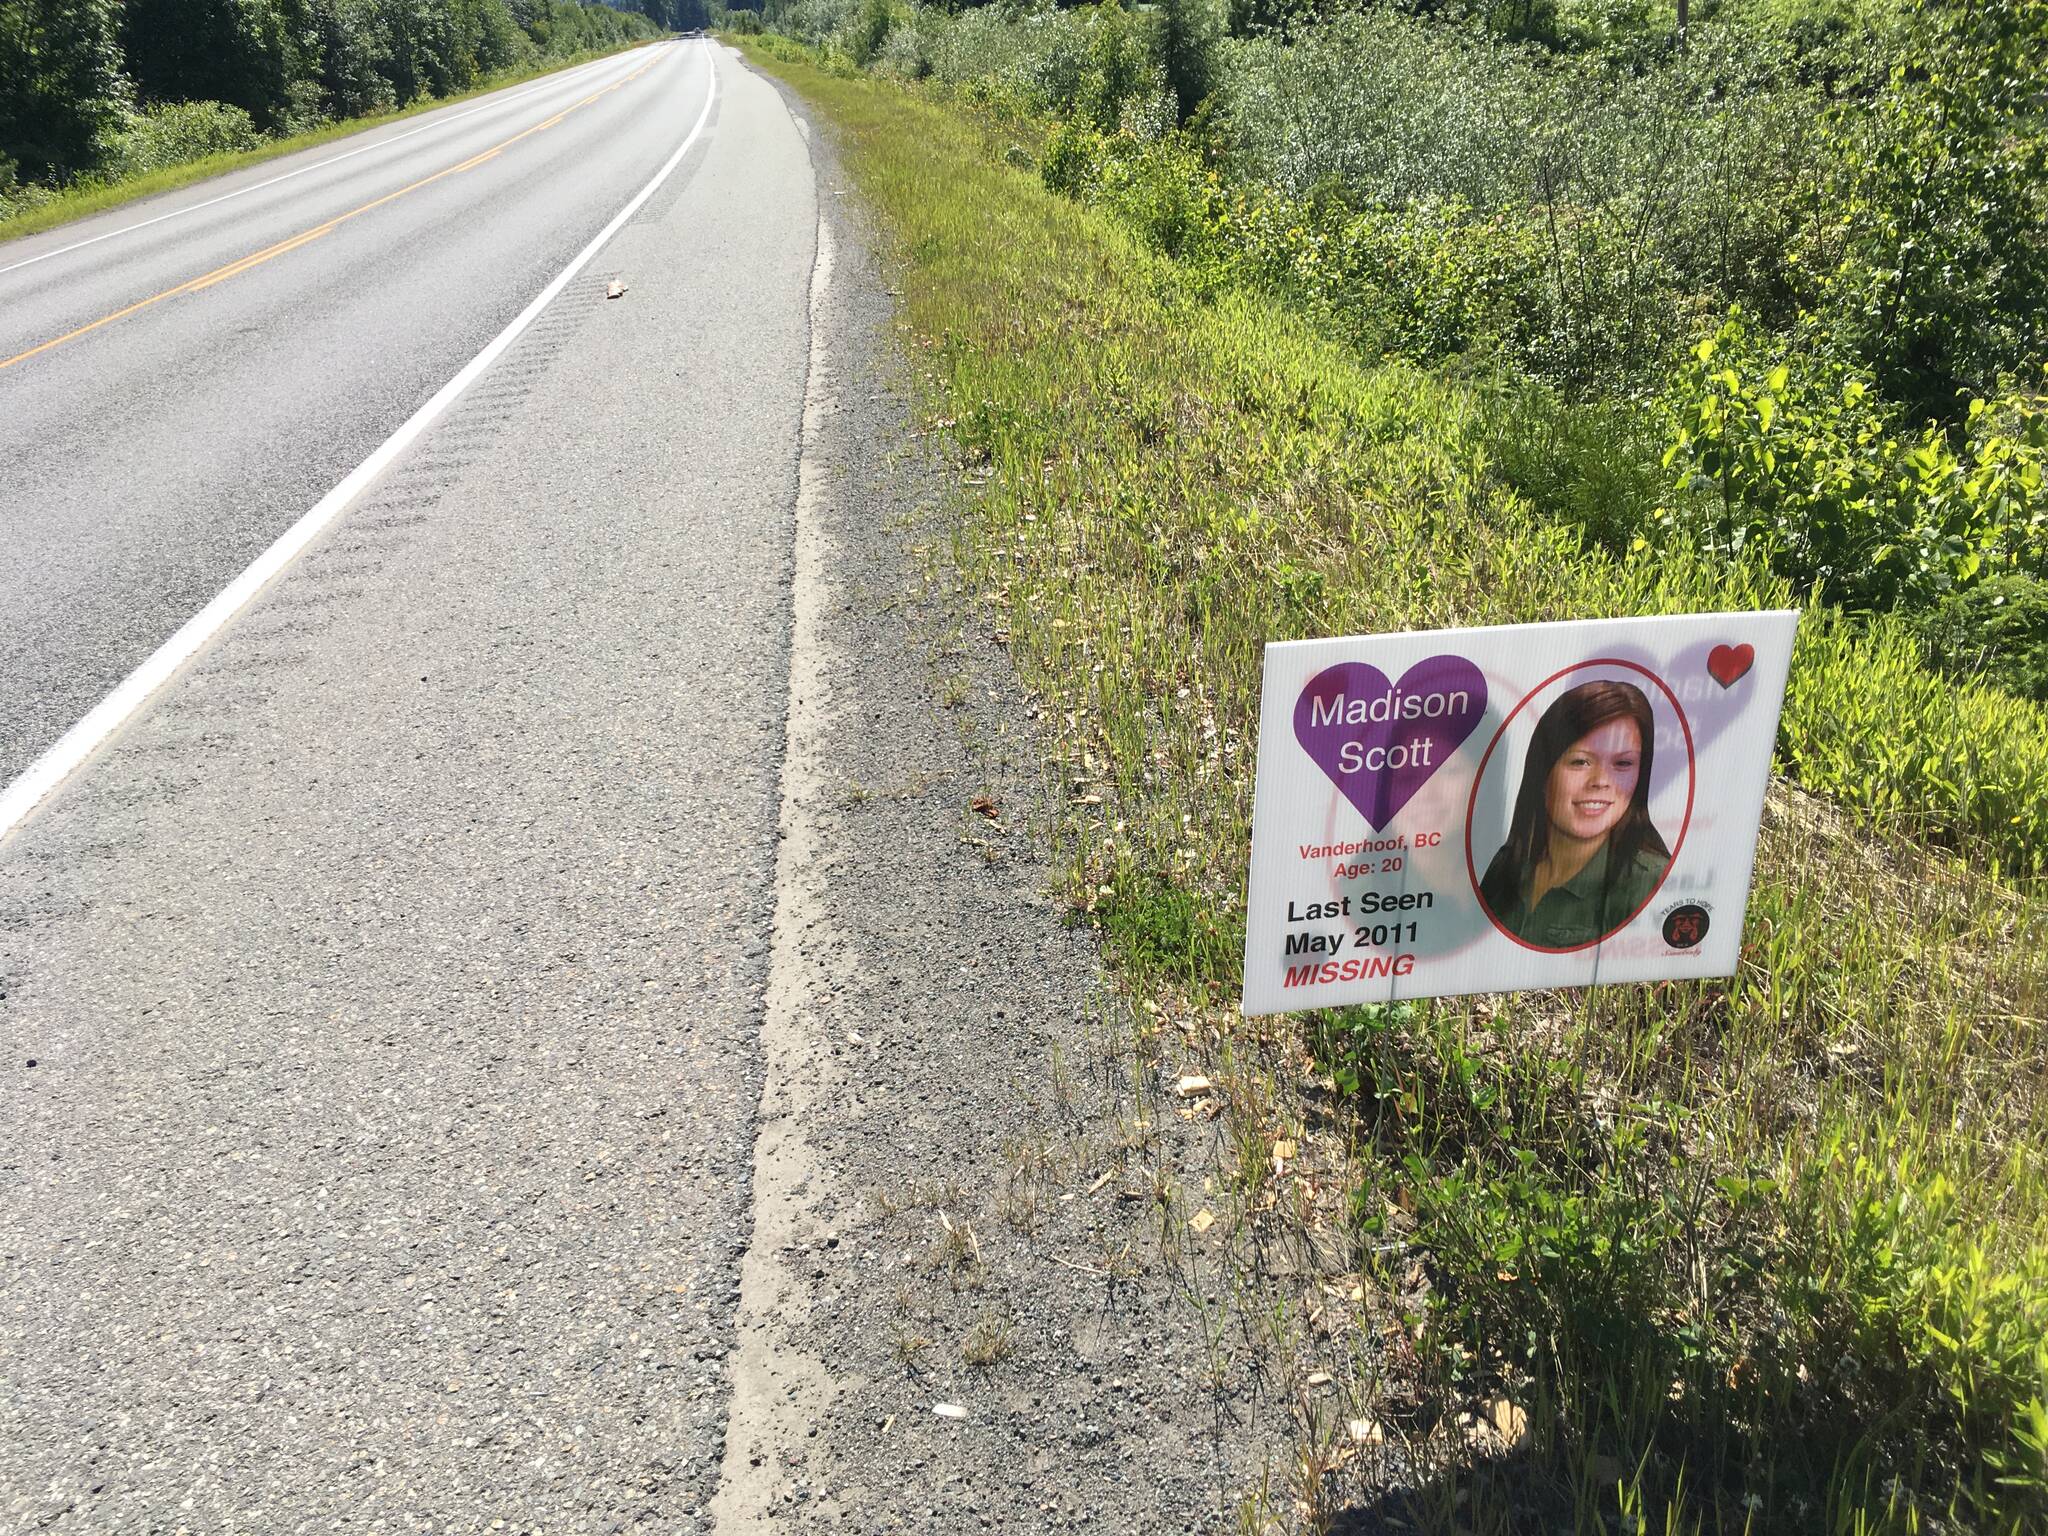 Madison Scott has been one of the region’s missing people featured on Tears to Hope relay signs over the years. Missing since 2011, her remains were found this May near her hometown of Vanderhoof. (File photo)